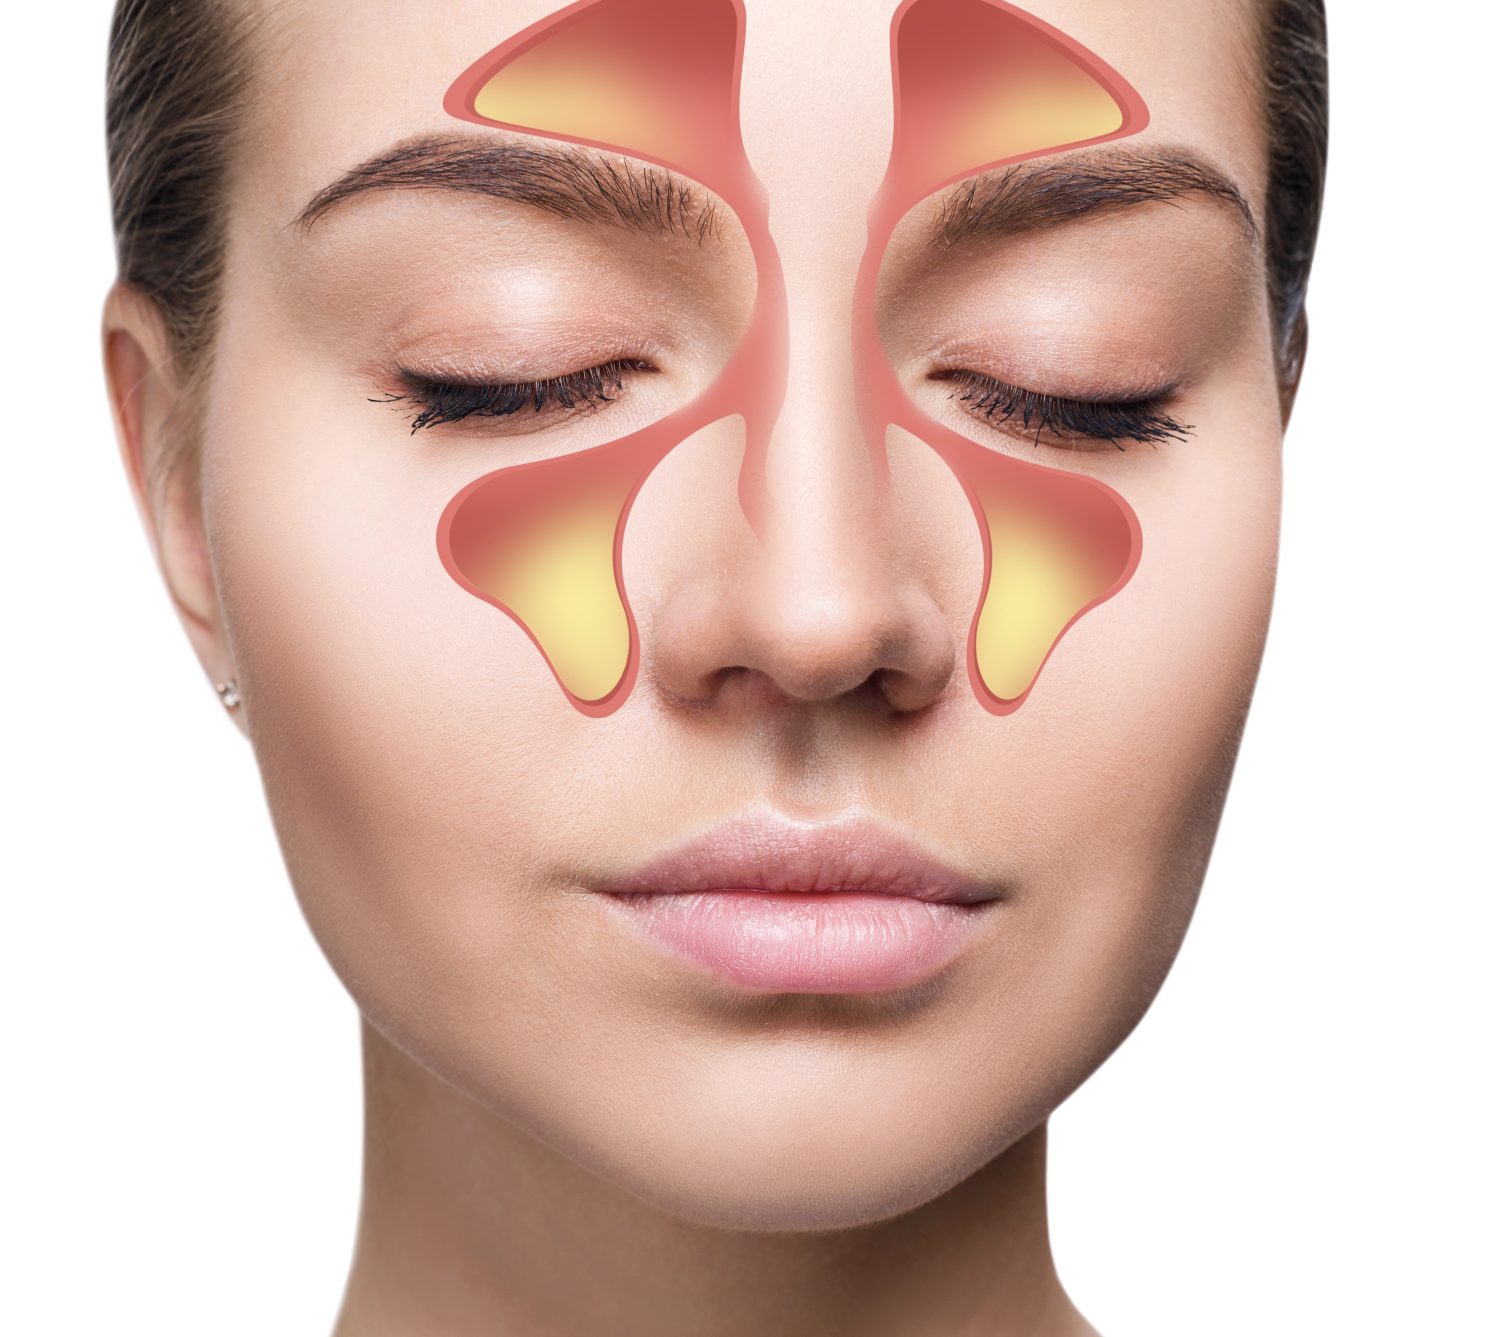 An image of a woman's face highlighting the location and shape of the sinuses.